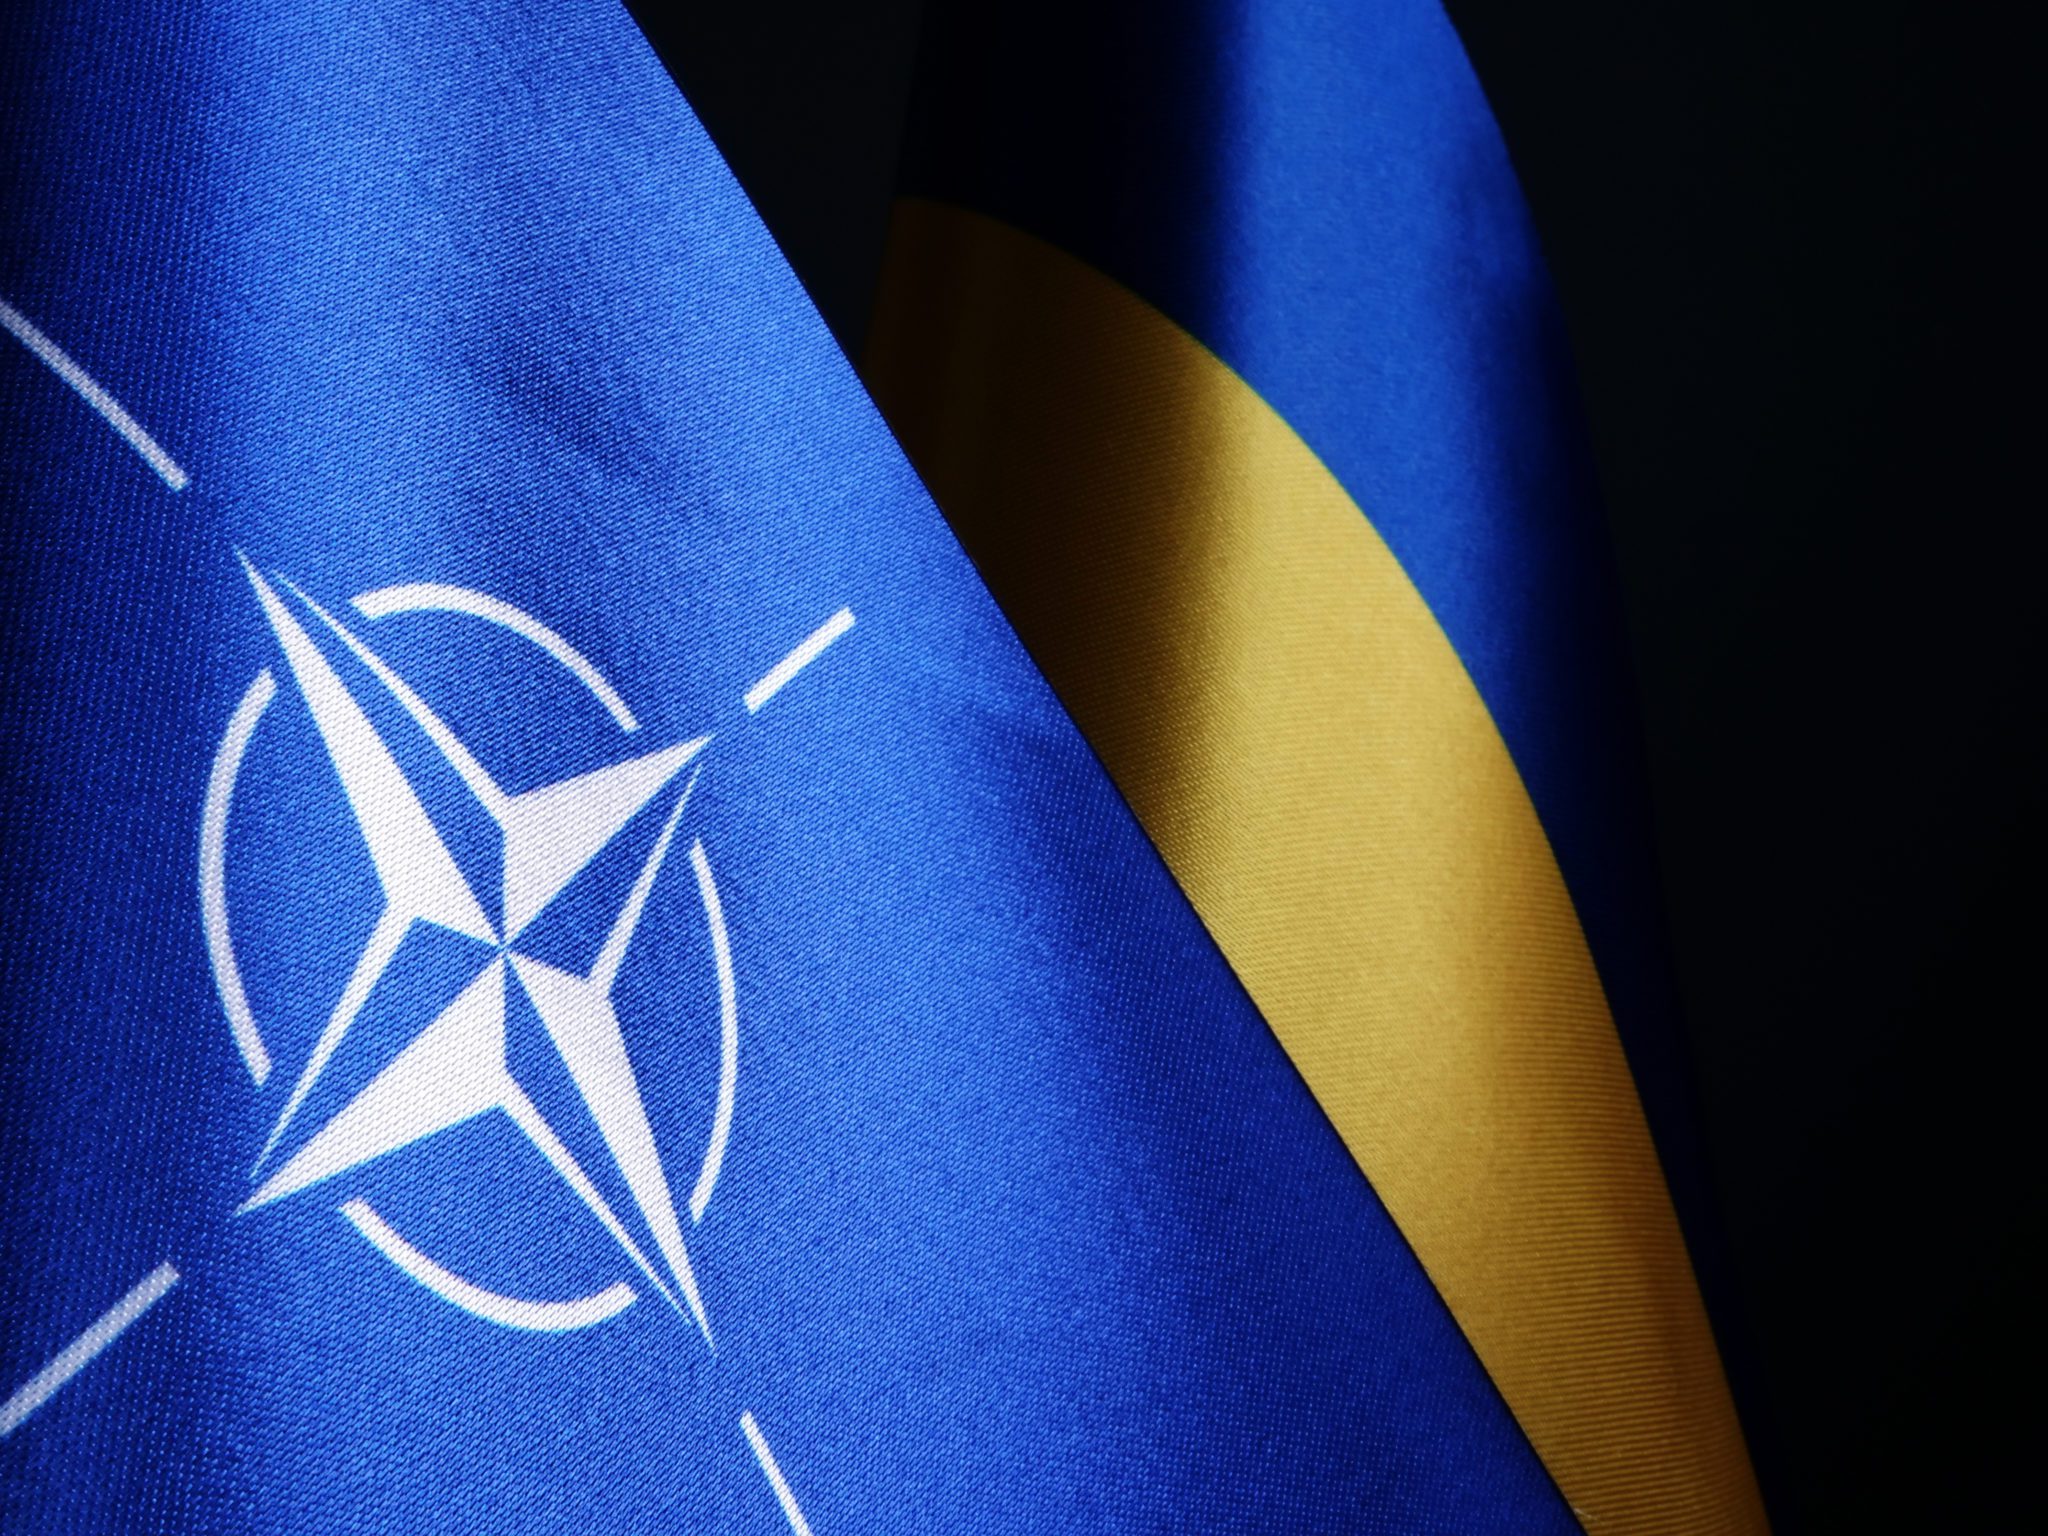 Making Ukraine a NATO Member in All but Name